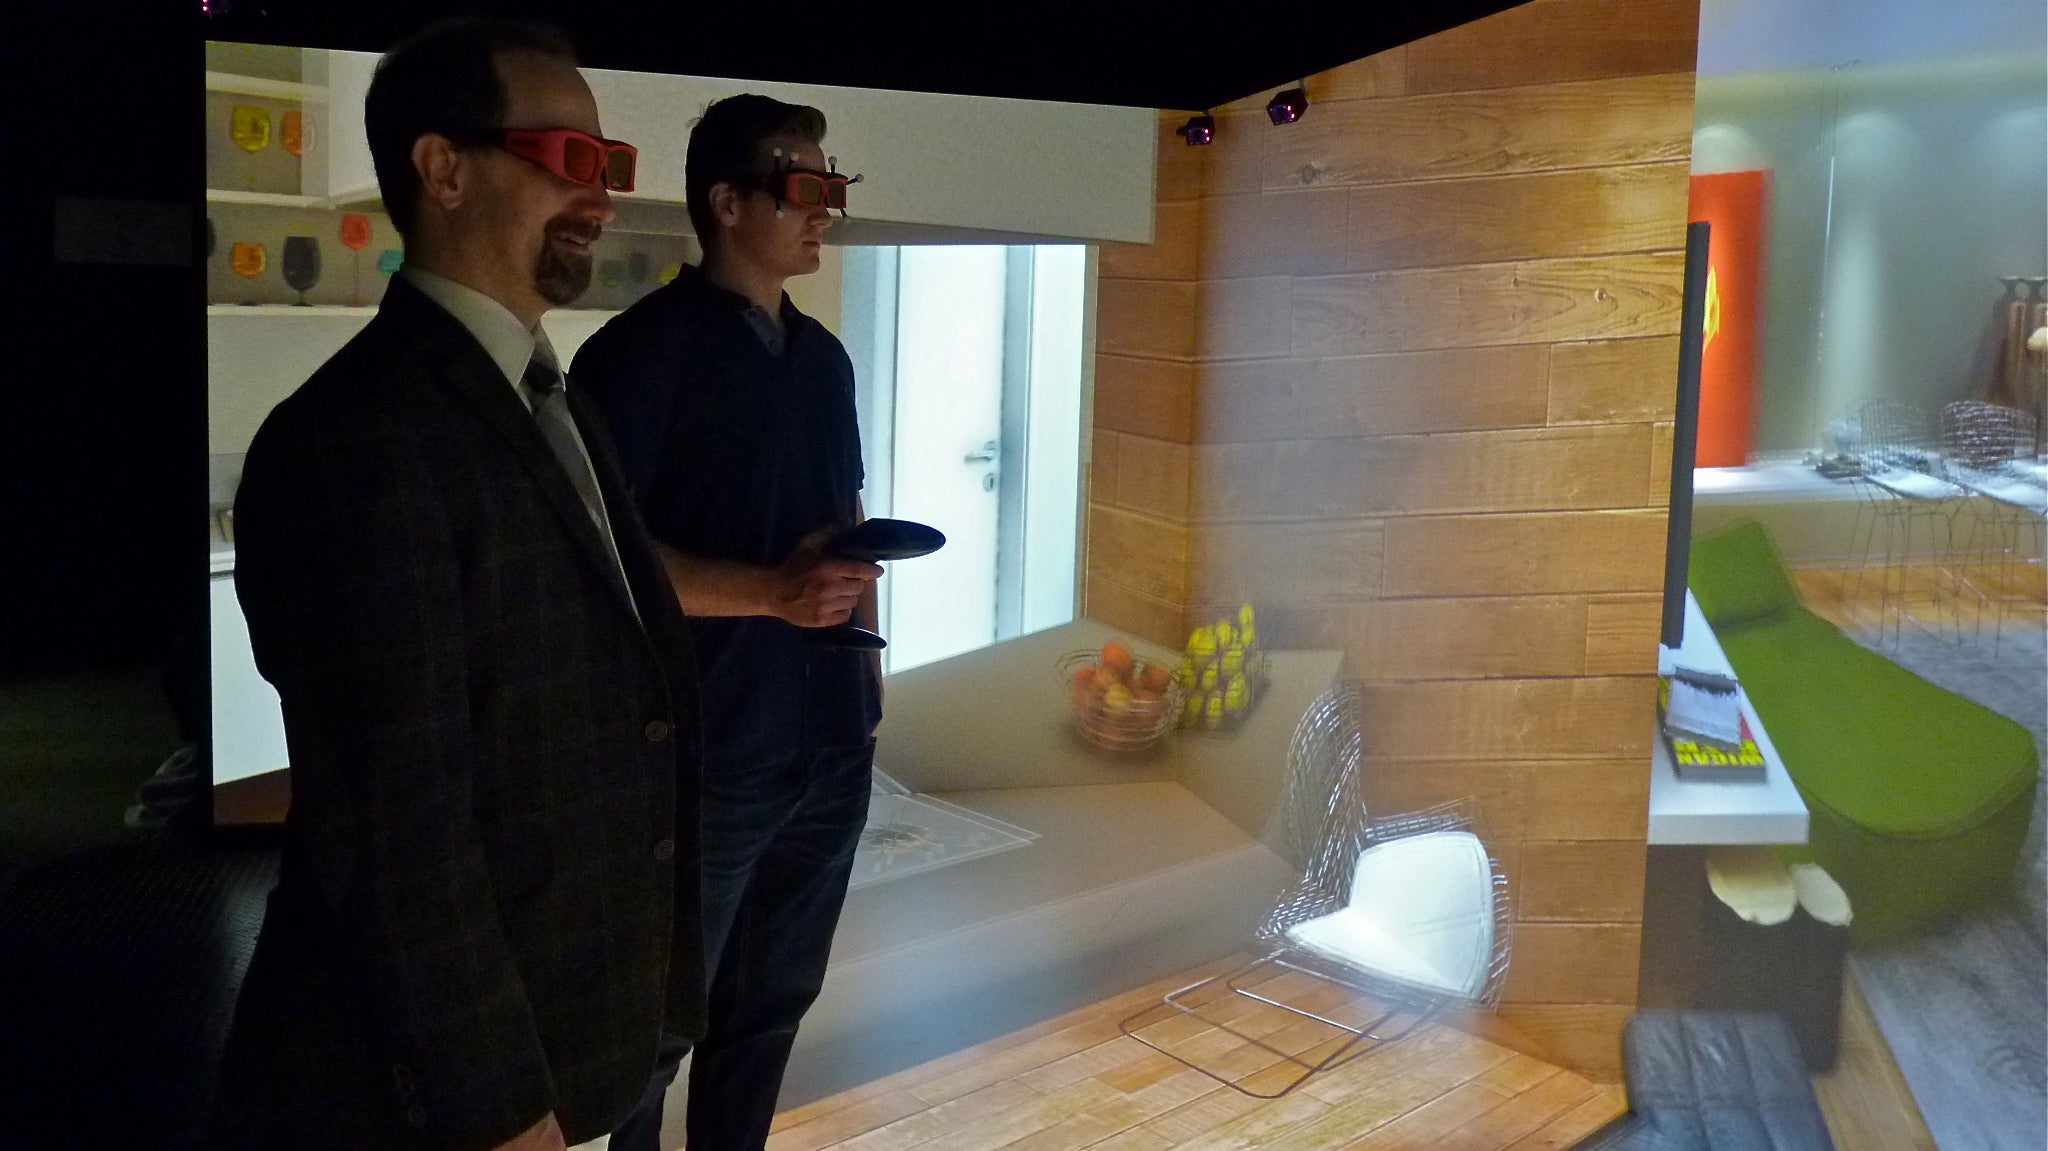 Villanova freshman Charles Walberg (right) explores a virtual room with computer science professor Frank Klassner. They are inside of a 'CAVE immersive learning space